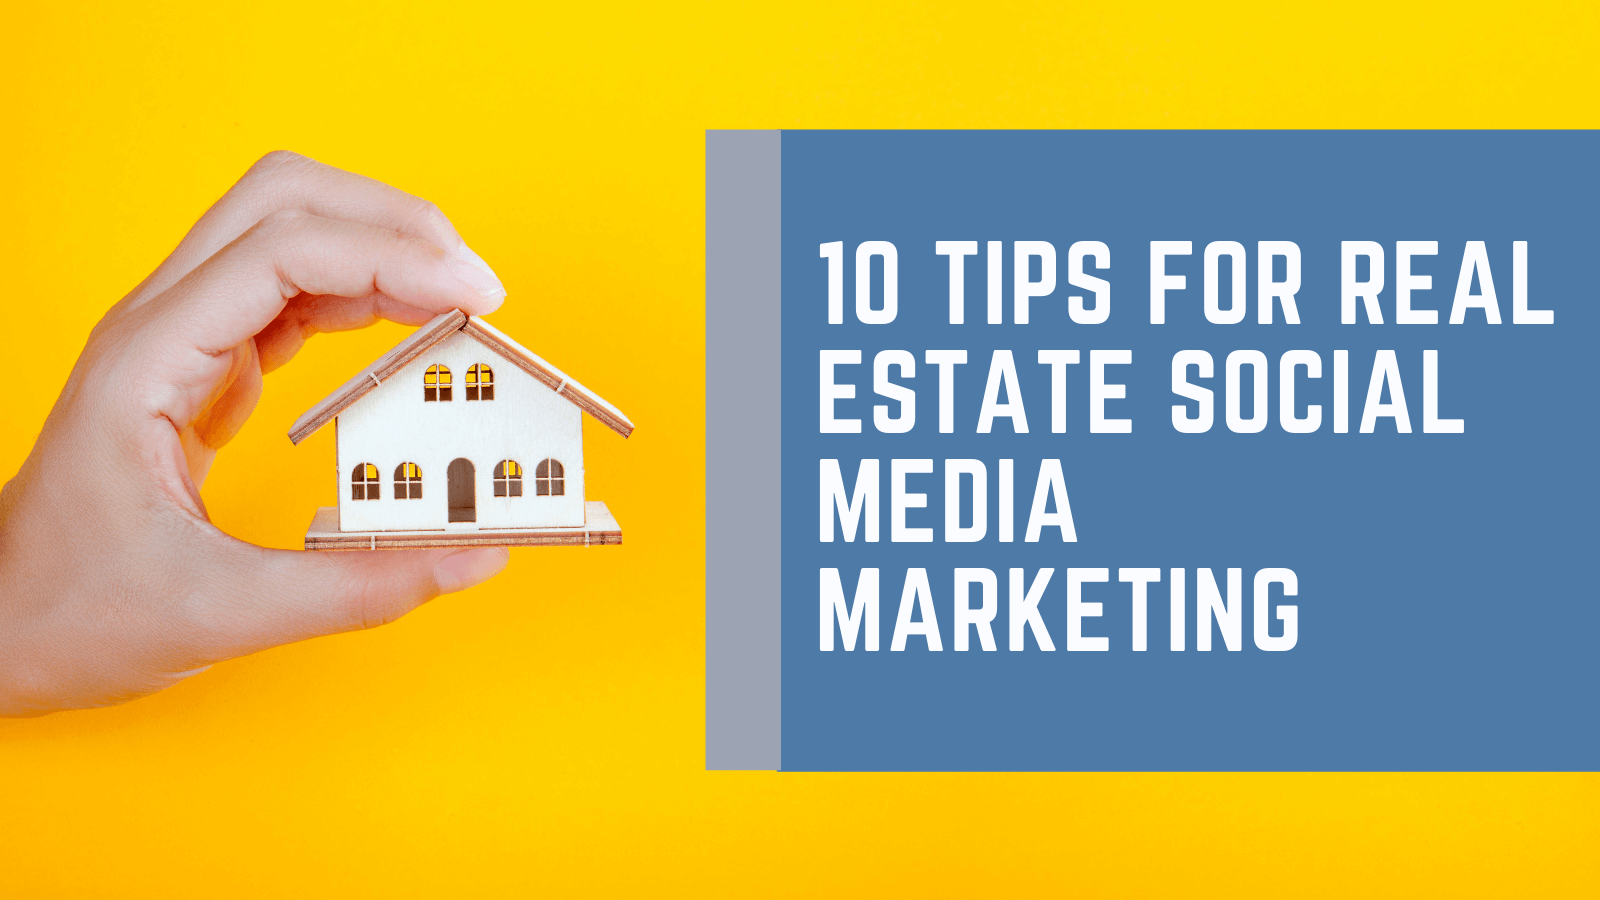 Improve your Real Estate Social Media Strategy in 7 Days